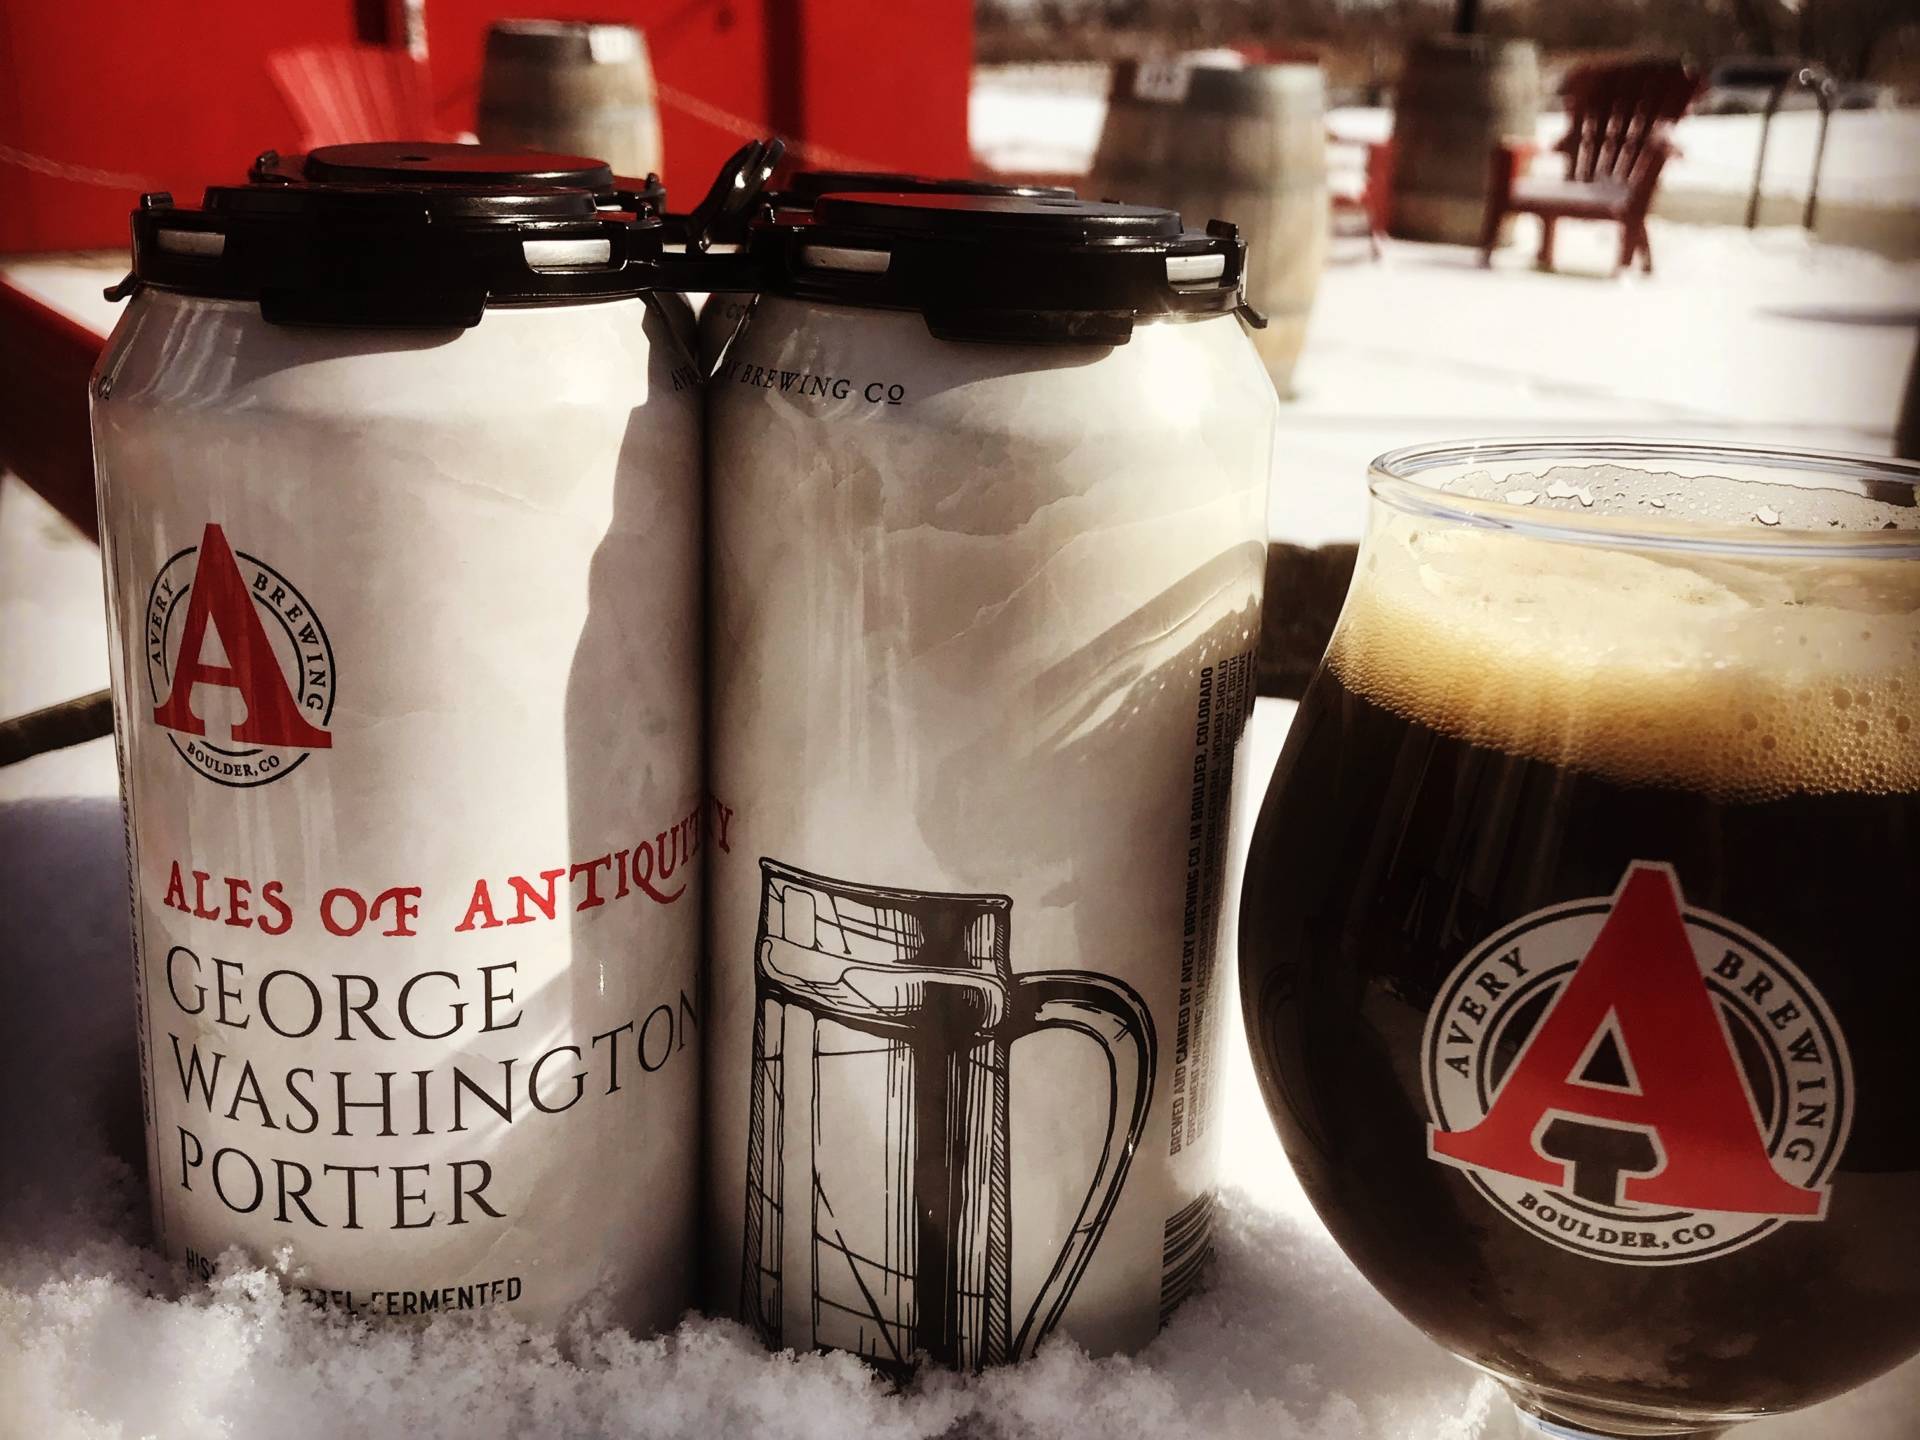 The latest "Ale of Antiquity" was inspired by George Washington's preference for porters. Rupp says one historic account mentioned the president "drank porter and three glasses of wine and became quite boisterous by the end of the dinner."